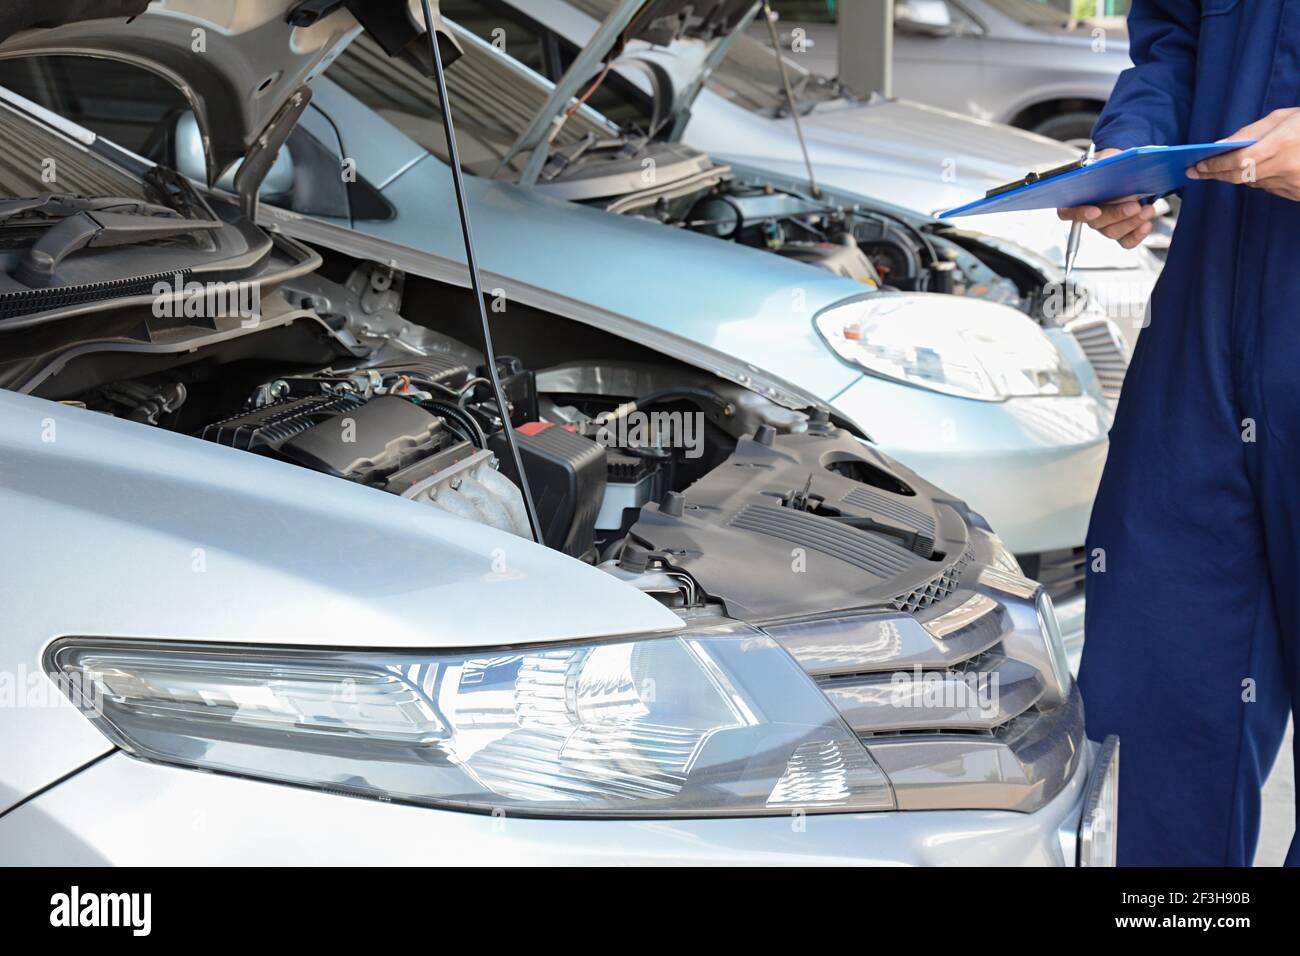 Auto mechanic (or technician) checking car engine at the garage Stock Photo